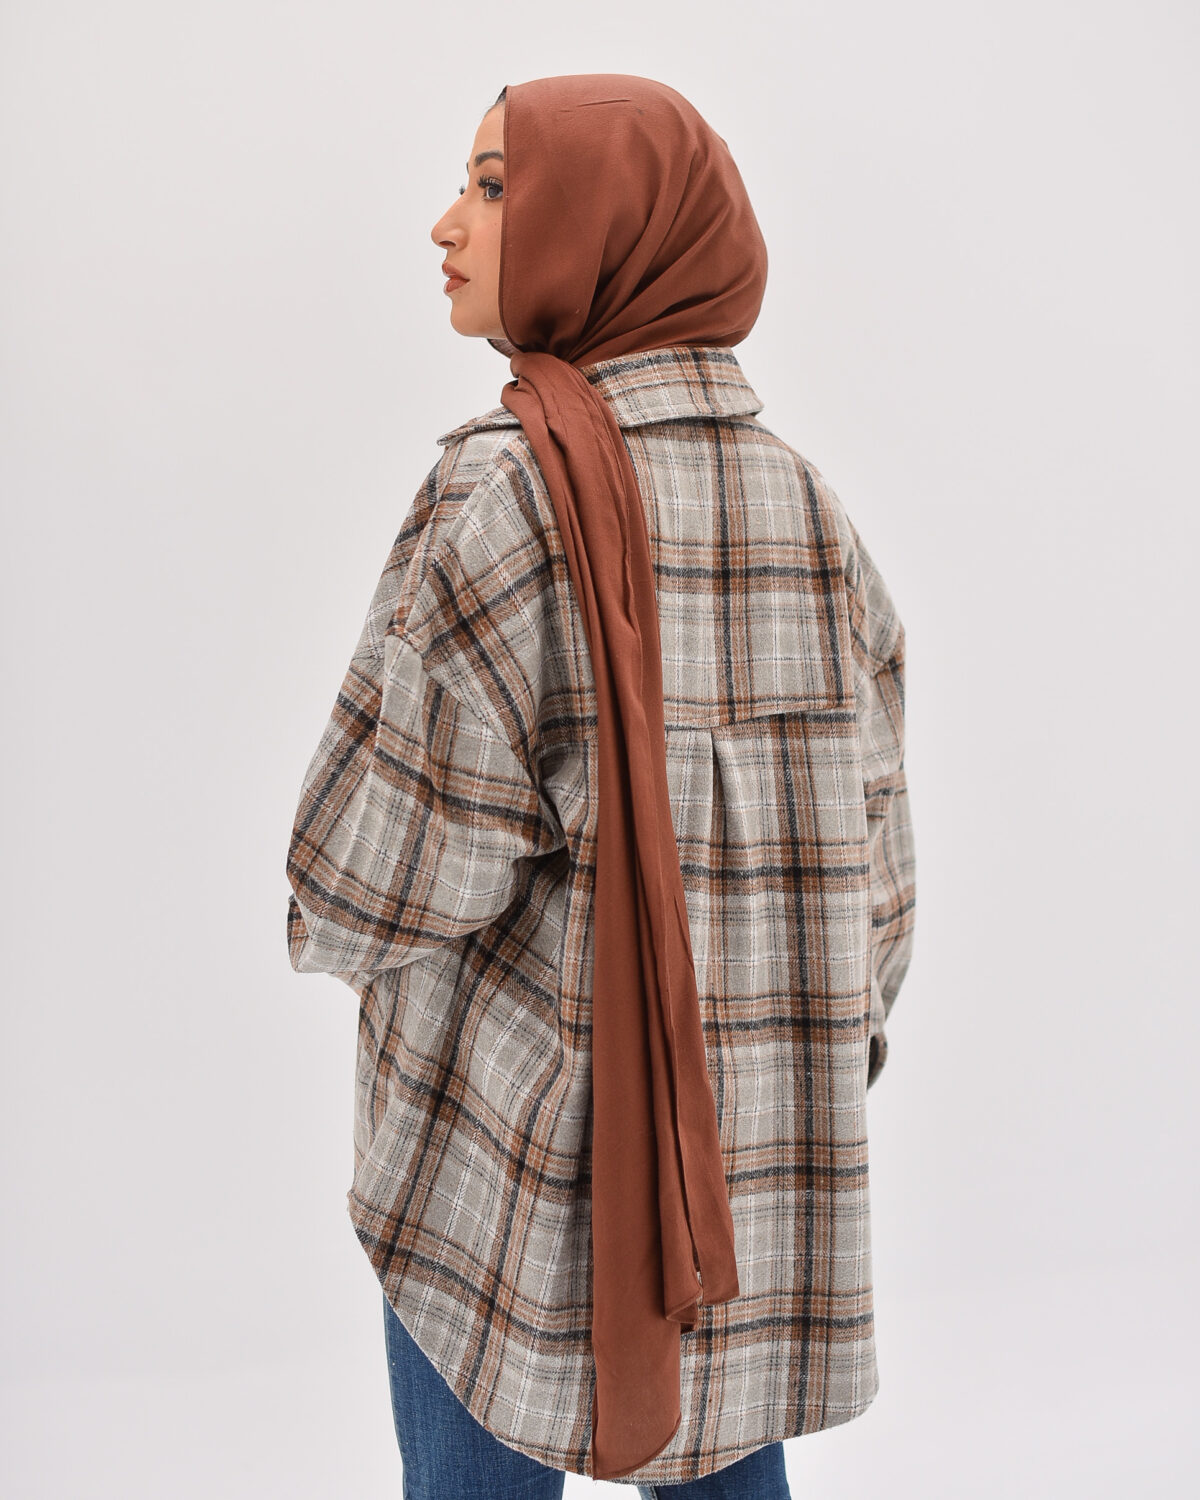 Brown Thick wool oversized check shirt